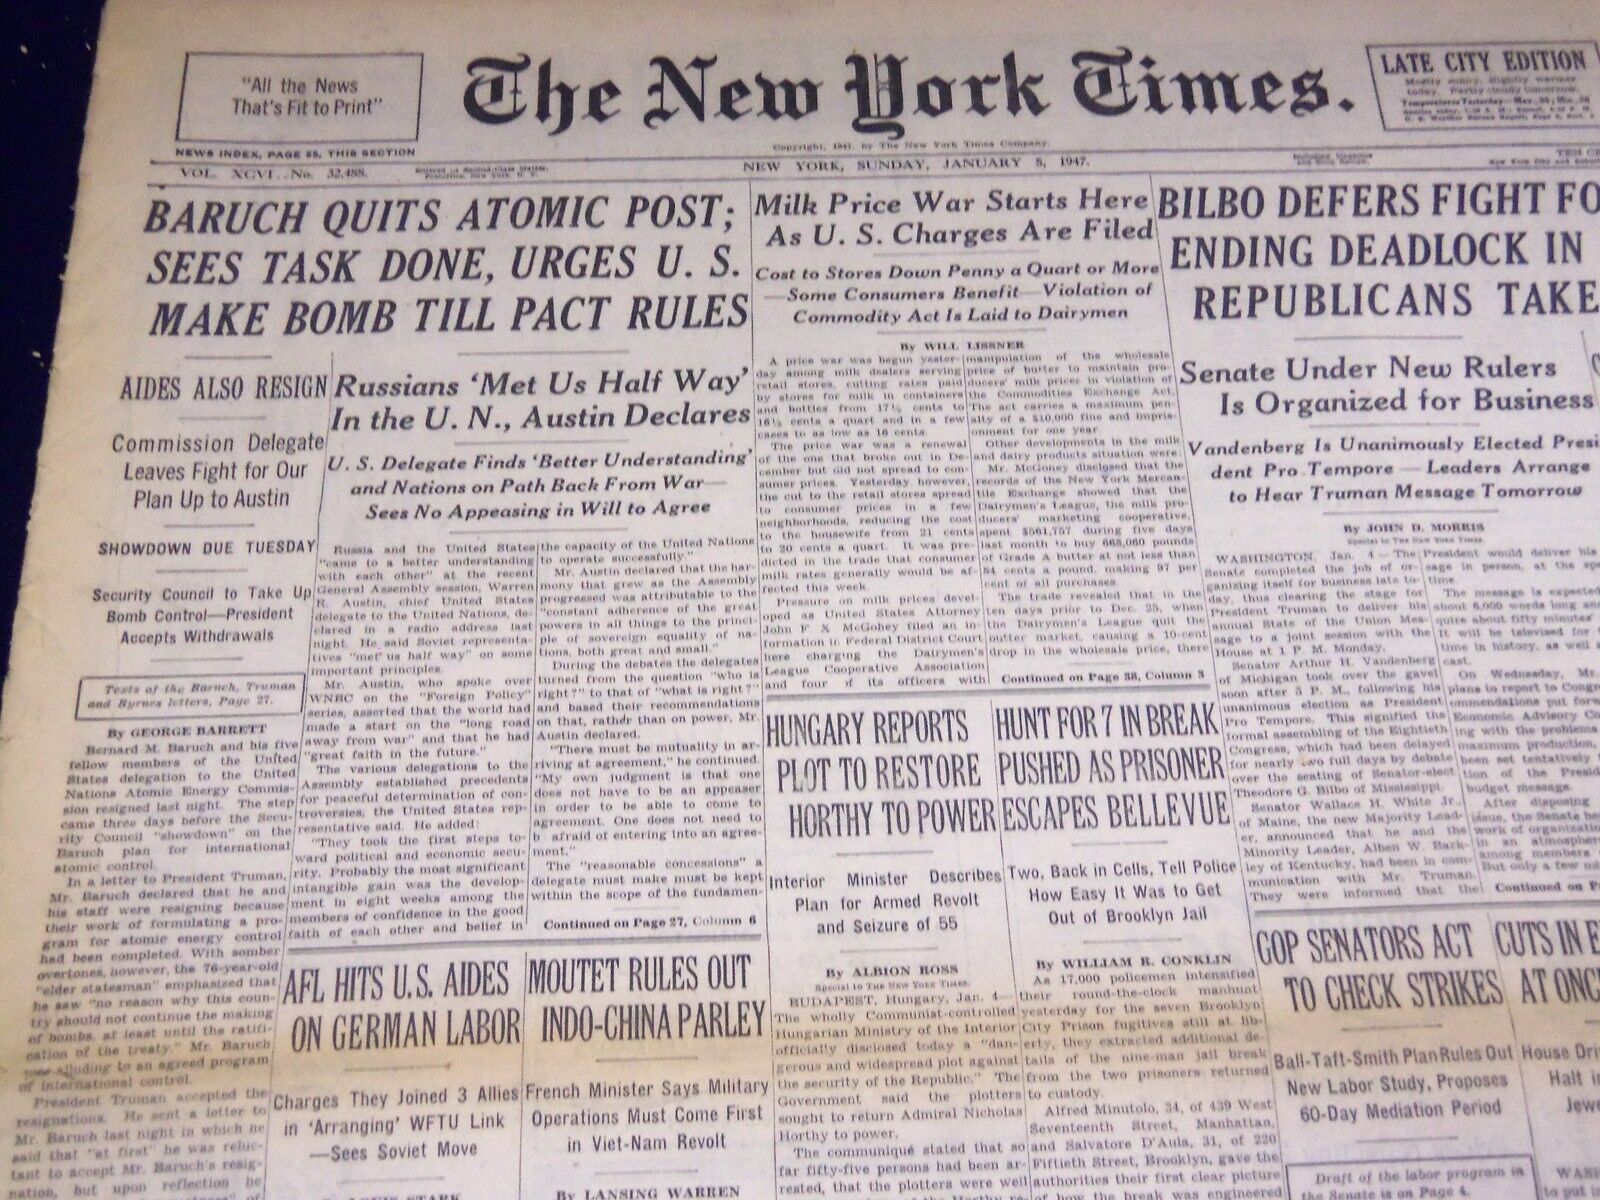 1947 JANUARY 5 NEW YORK TIMES - BARUCH QUITS ATOMIC POST - NT 2767